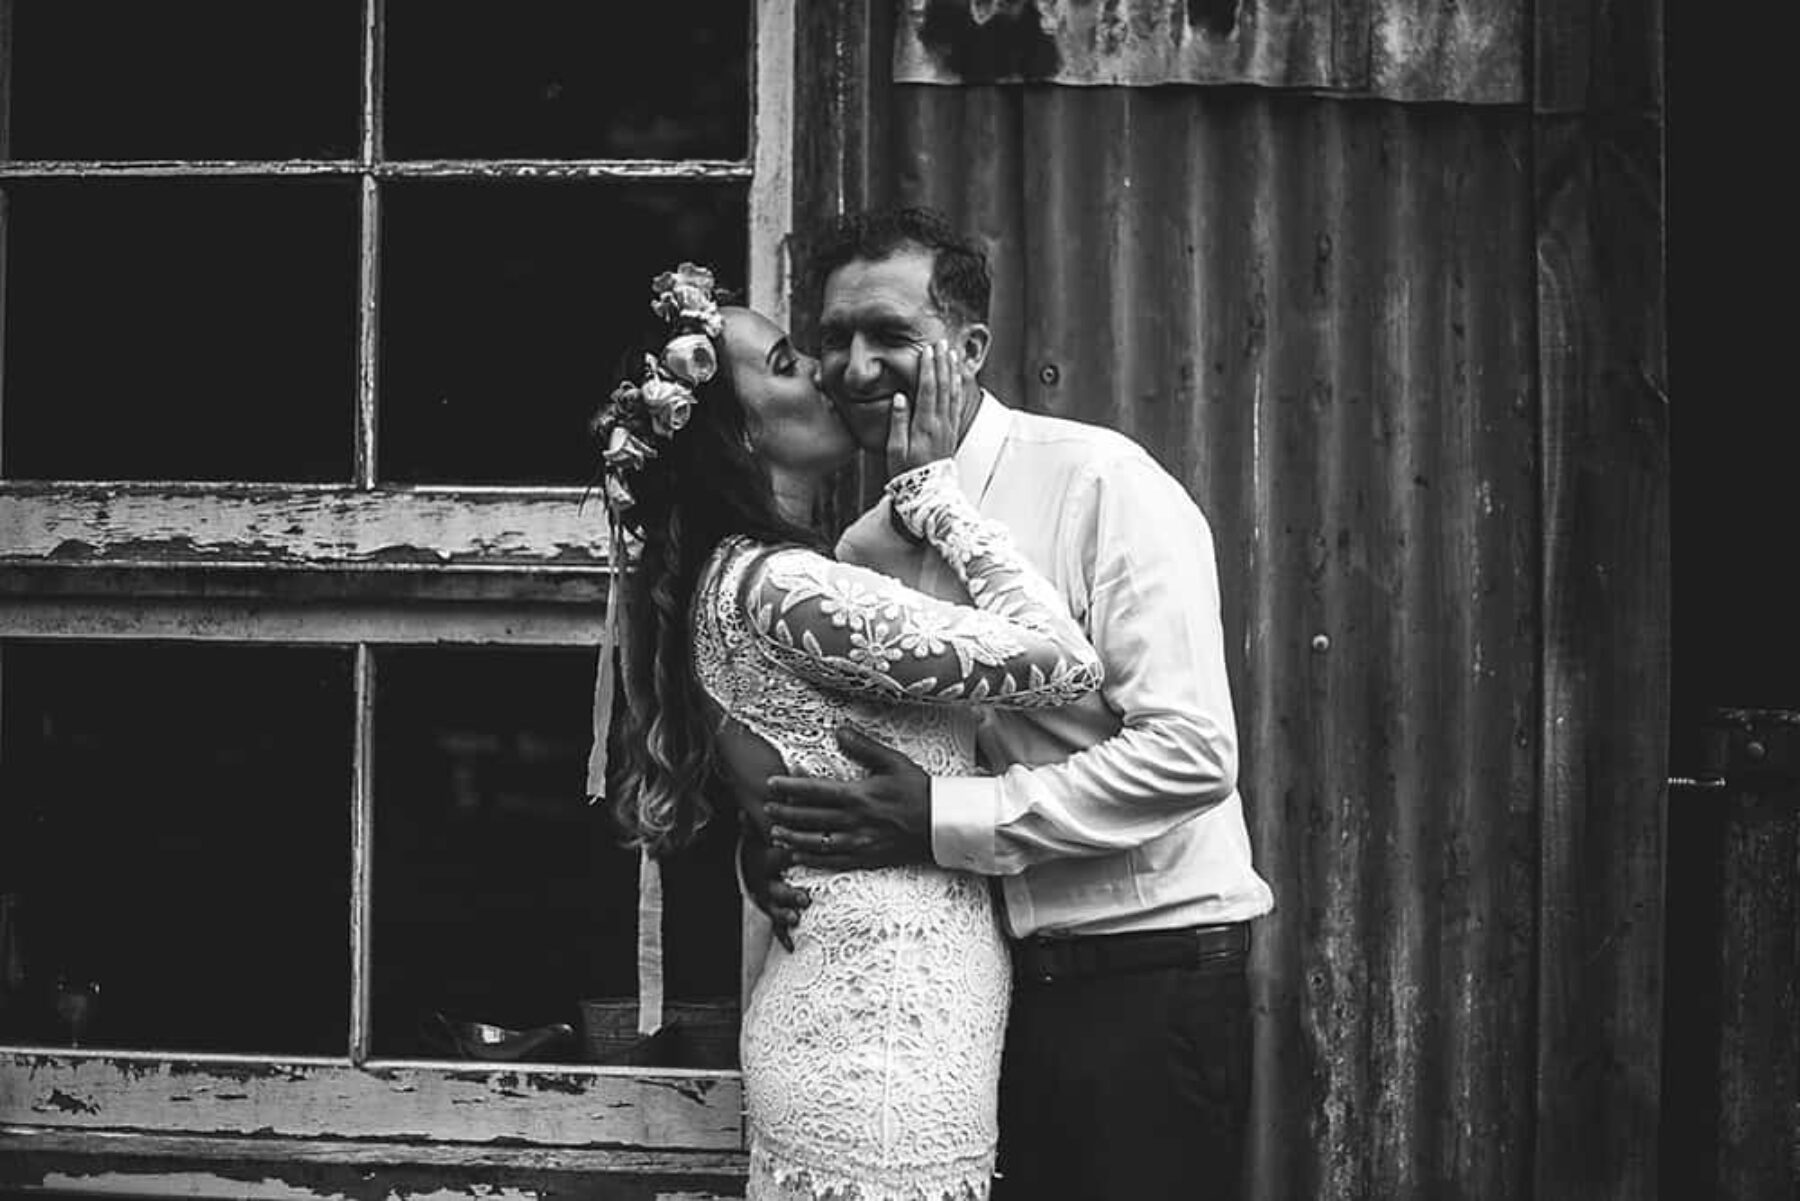 Rustic wedding at New Zealand's Old Forest School - photography by Lucy Rice